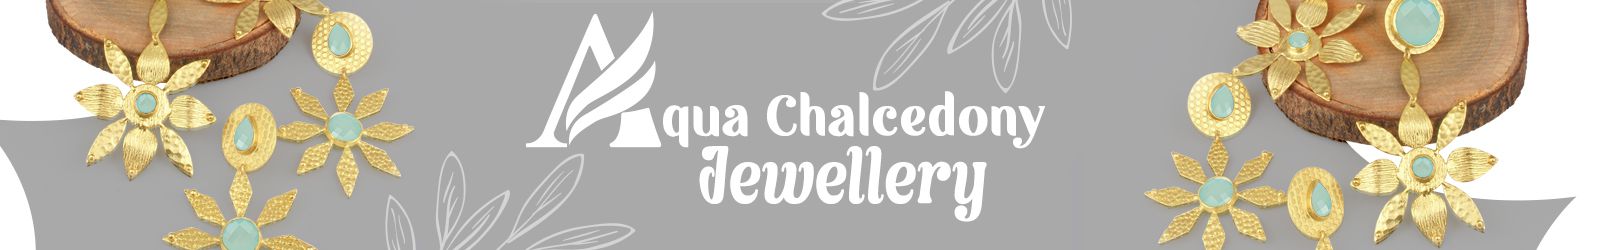 Wholesale Online Aqua Chalcedony Silver Jewelry Manufacturer in Jaipur